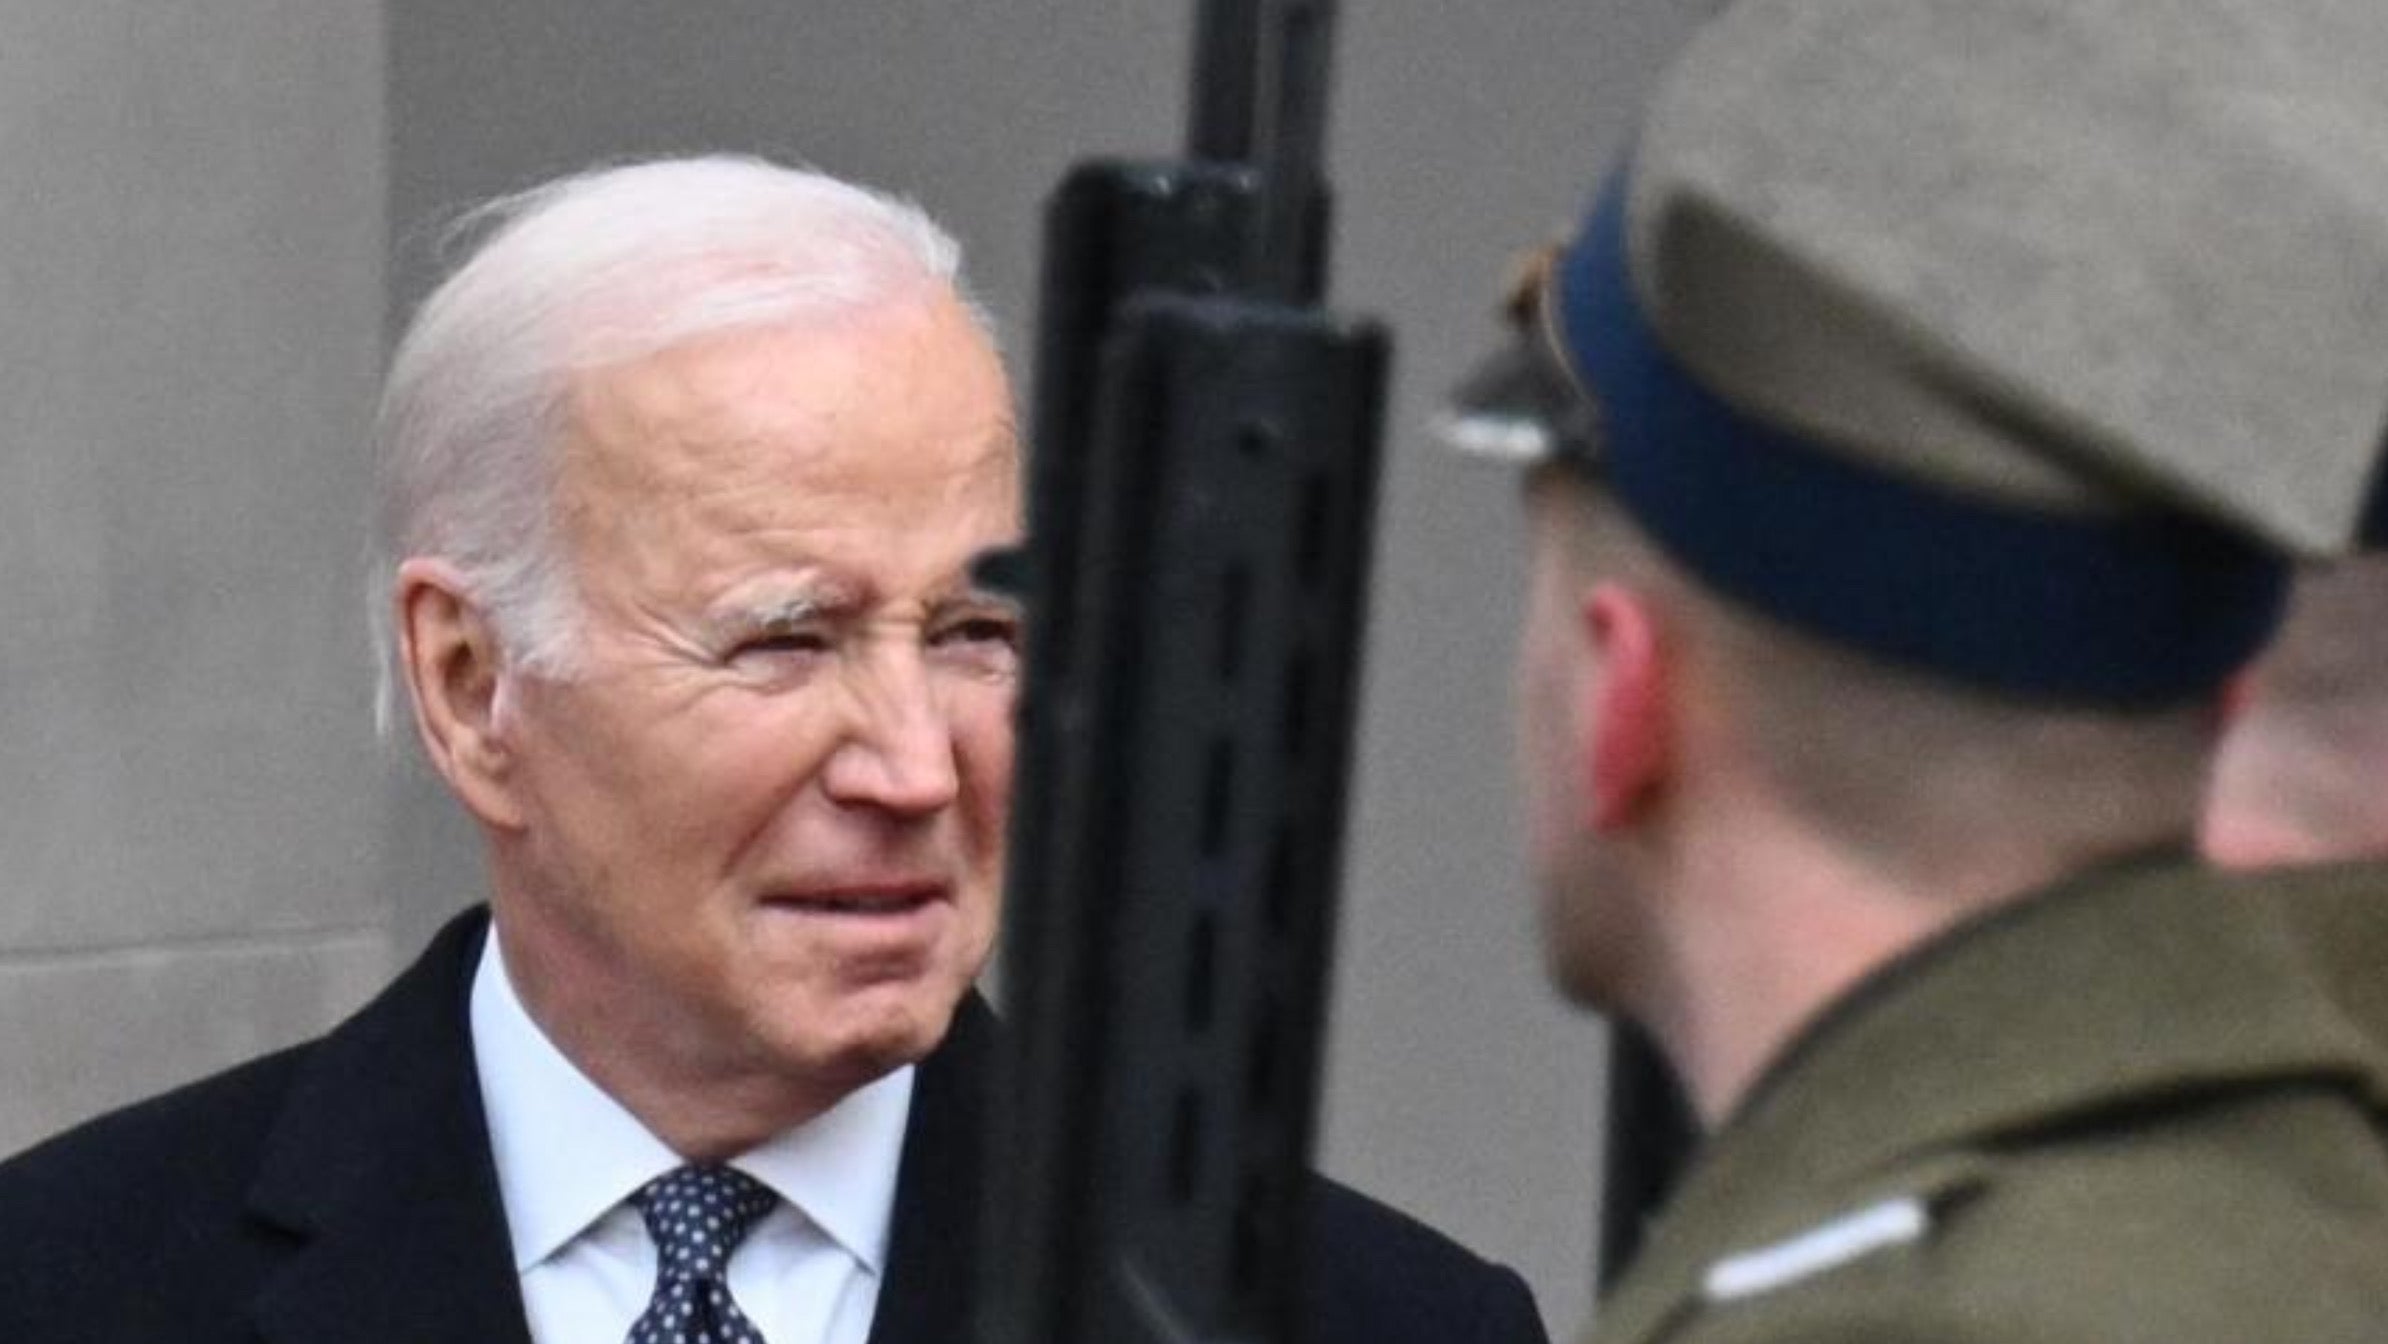 Kiev is strong, Kiev is proud, it stands tall and above all it is free: Biden gives a fighting speech in Warsaw, Magnate Daily